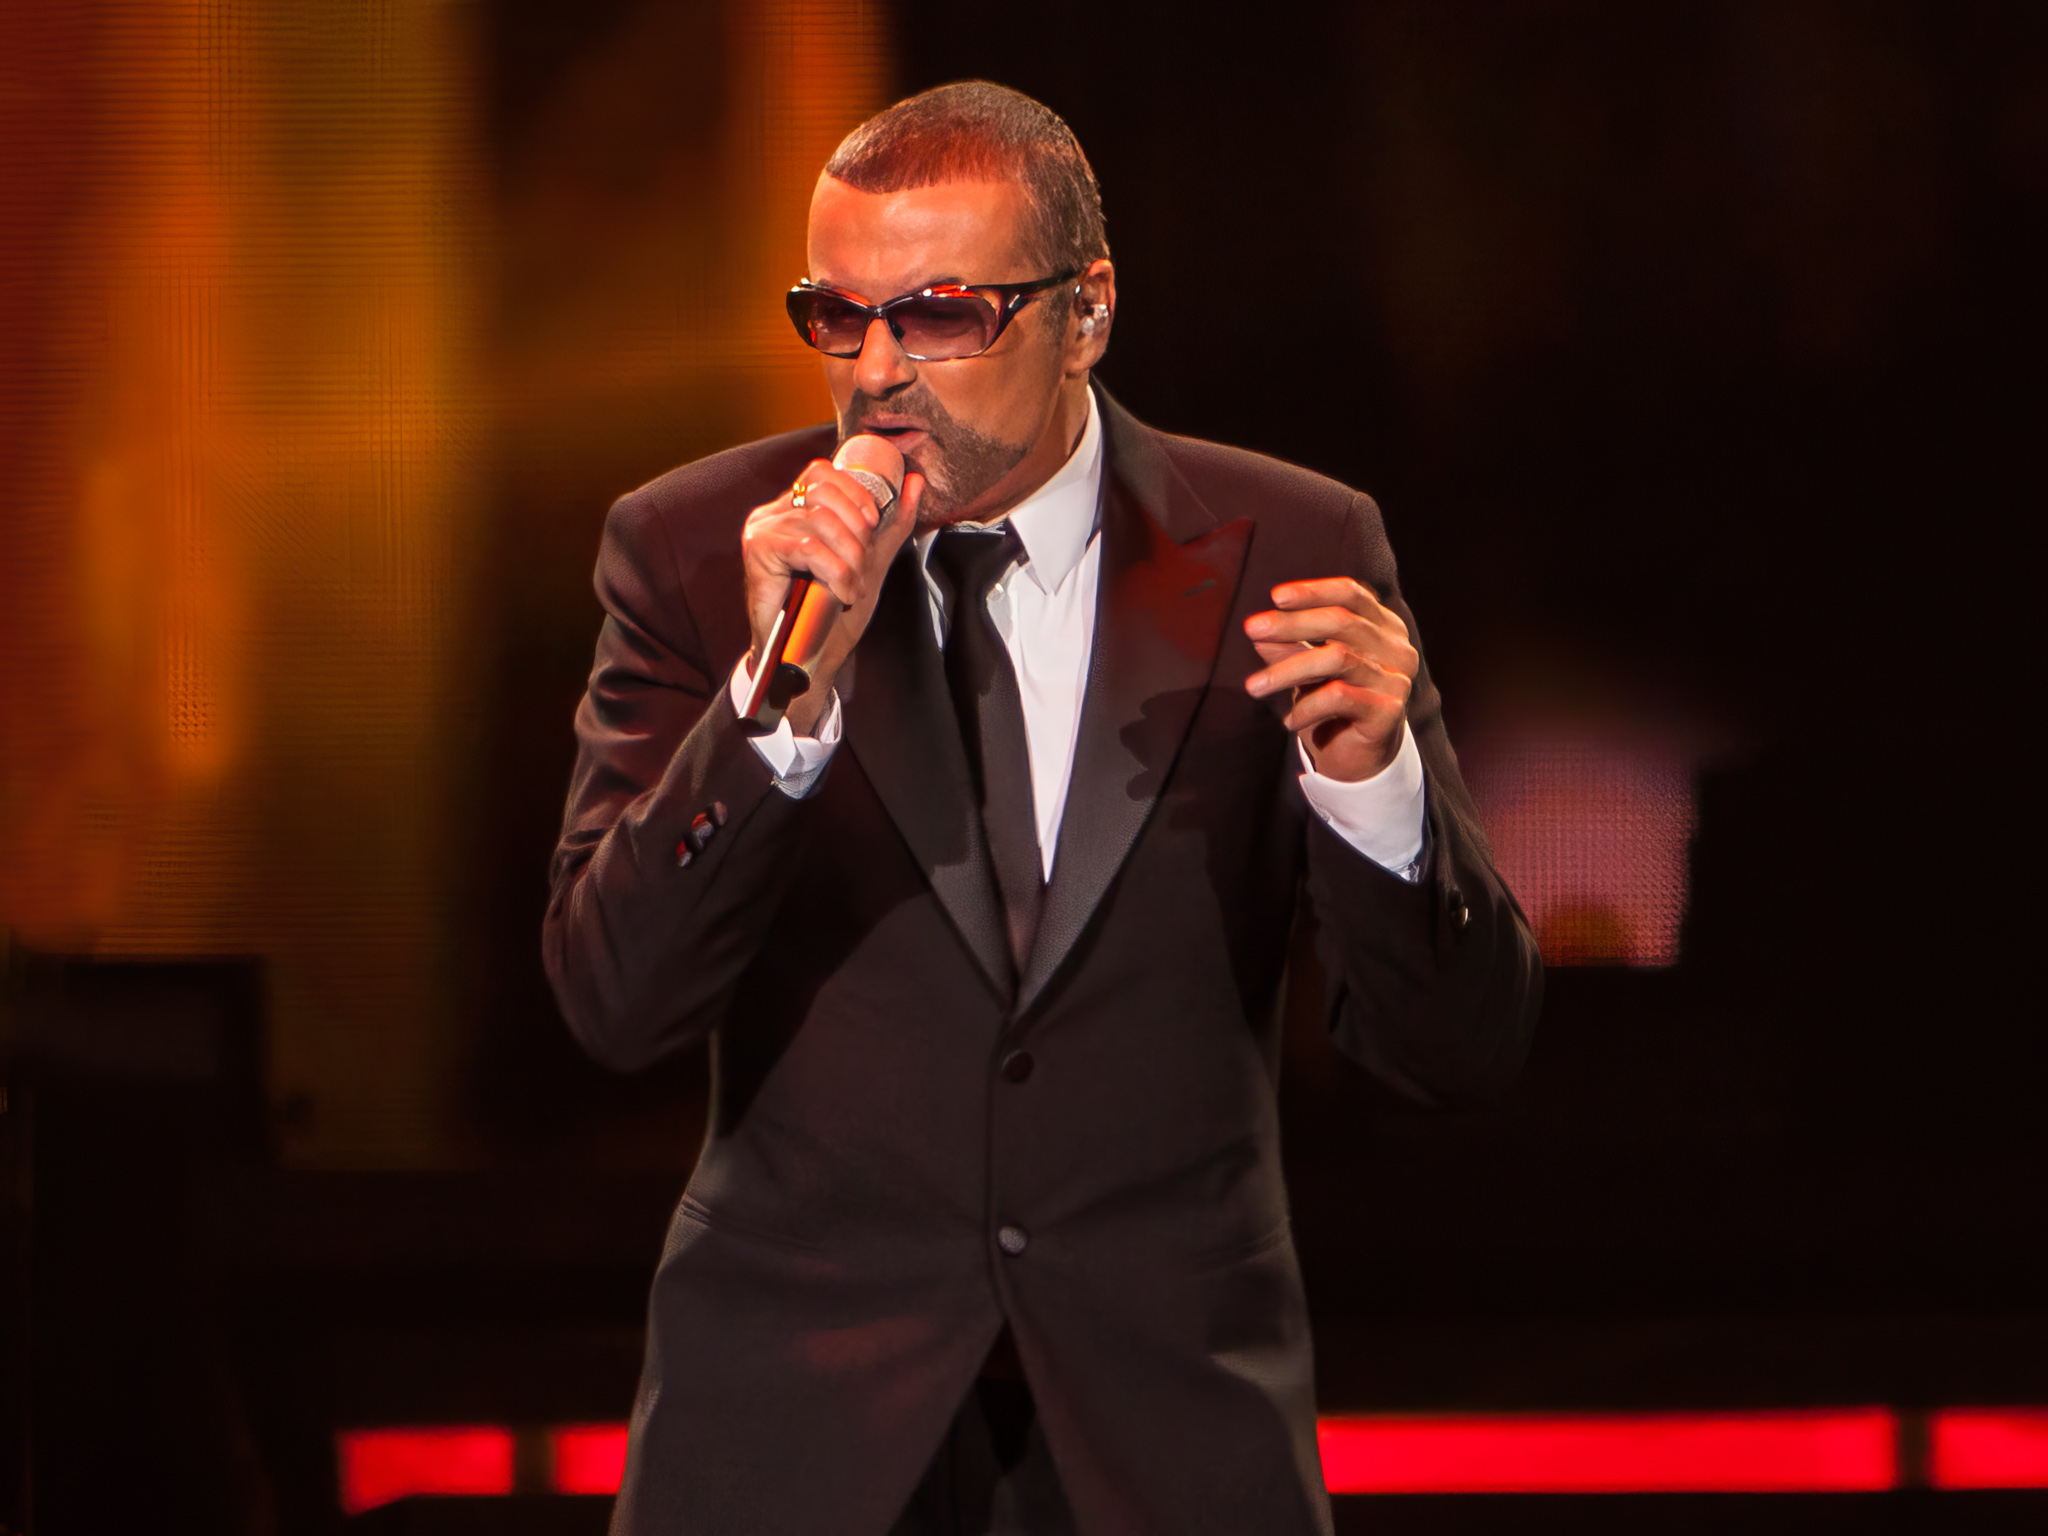 George Michael live at the Ziggo Dome 2012 by Bullet-ray Photography